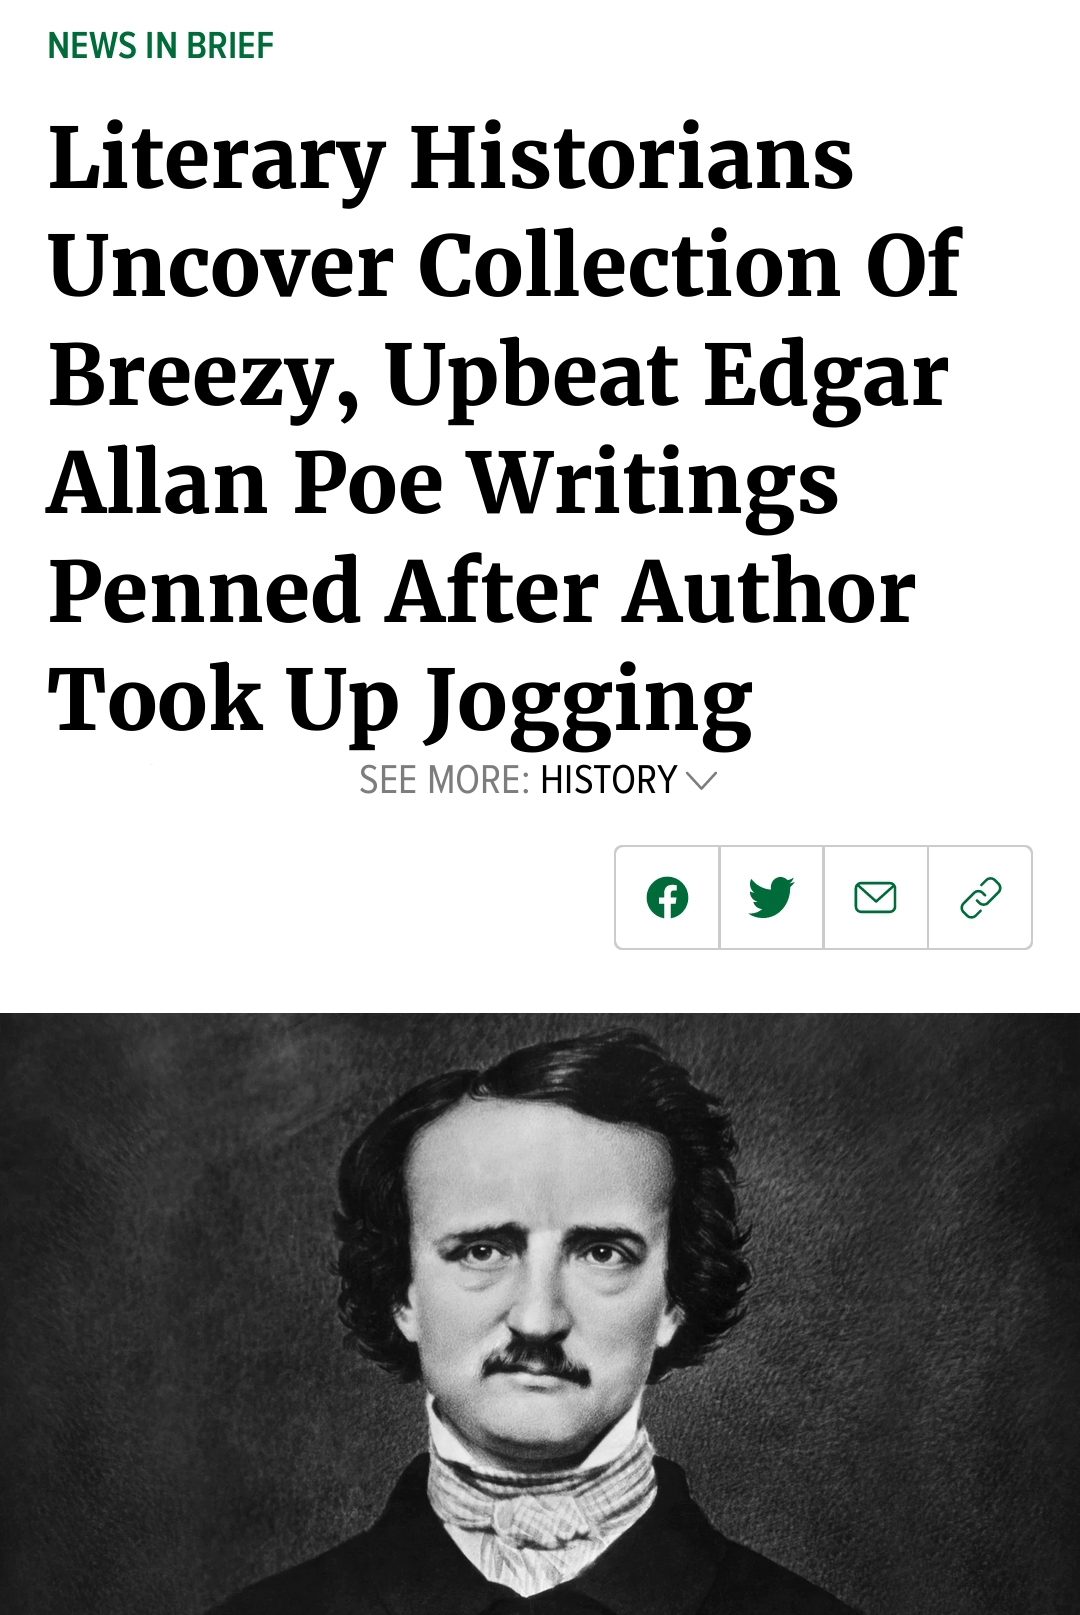 human behavior - News In Brief Literary Historians Uncover Collection of Breezy, Upbeat Edgar Allan Poe Writings Penned After Author Took Up Jogging See More History